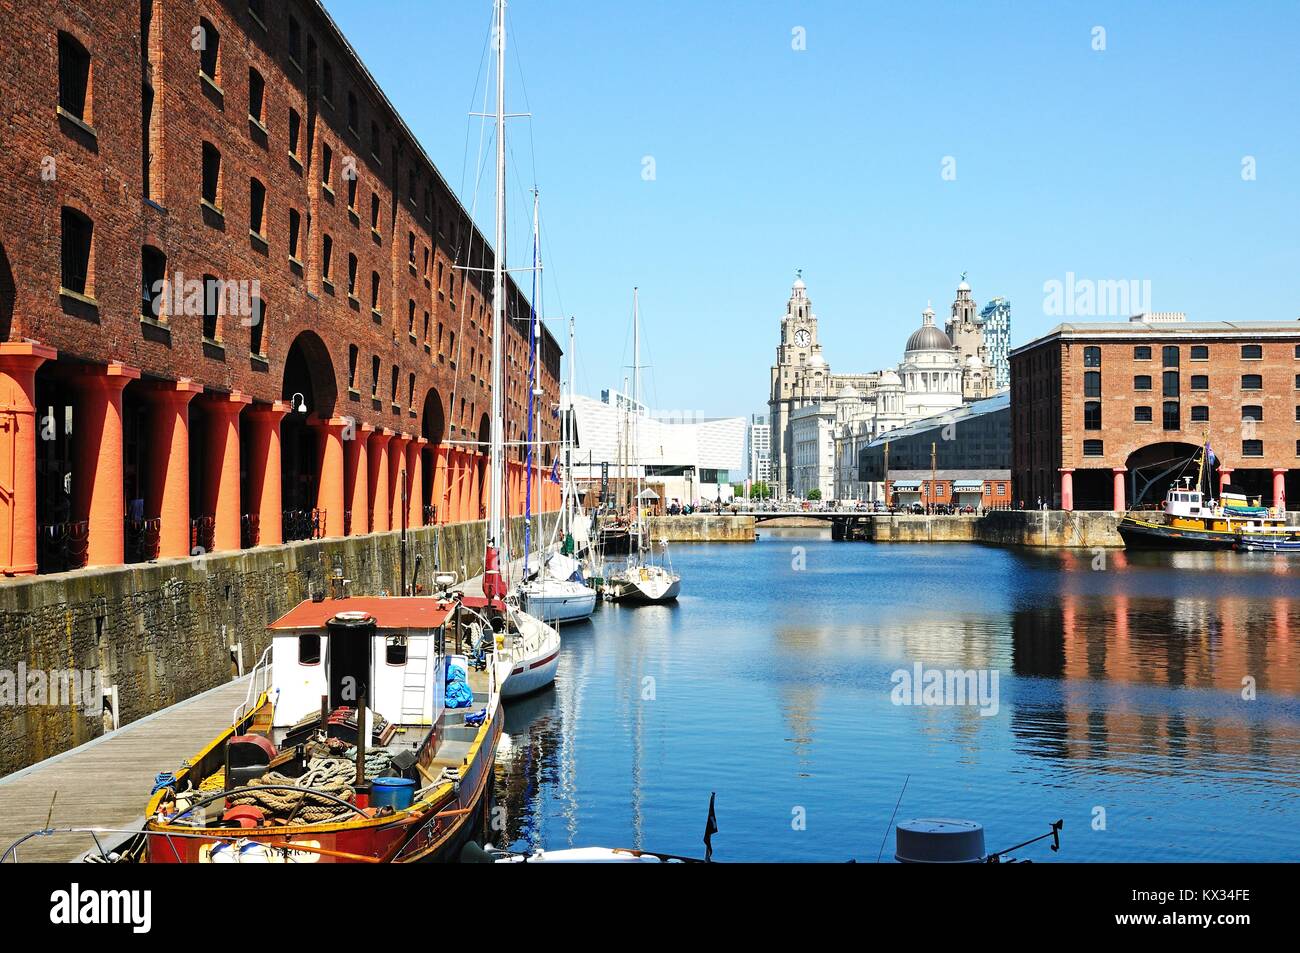 Yachts moored in Albert Dock with the Three Graces to the rear, Liverpool, Merseyside, England, UK, Western Europe. Stock Photo